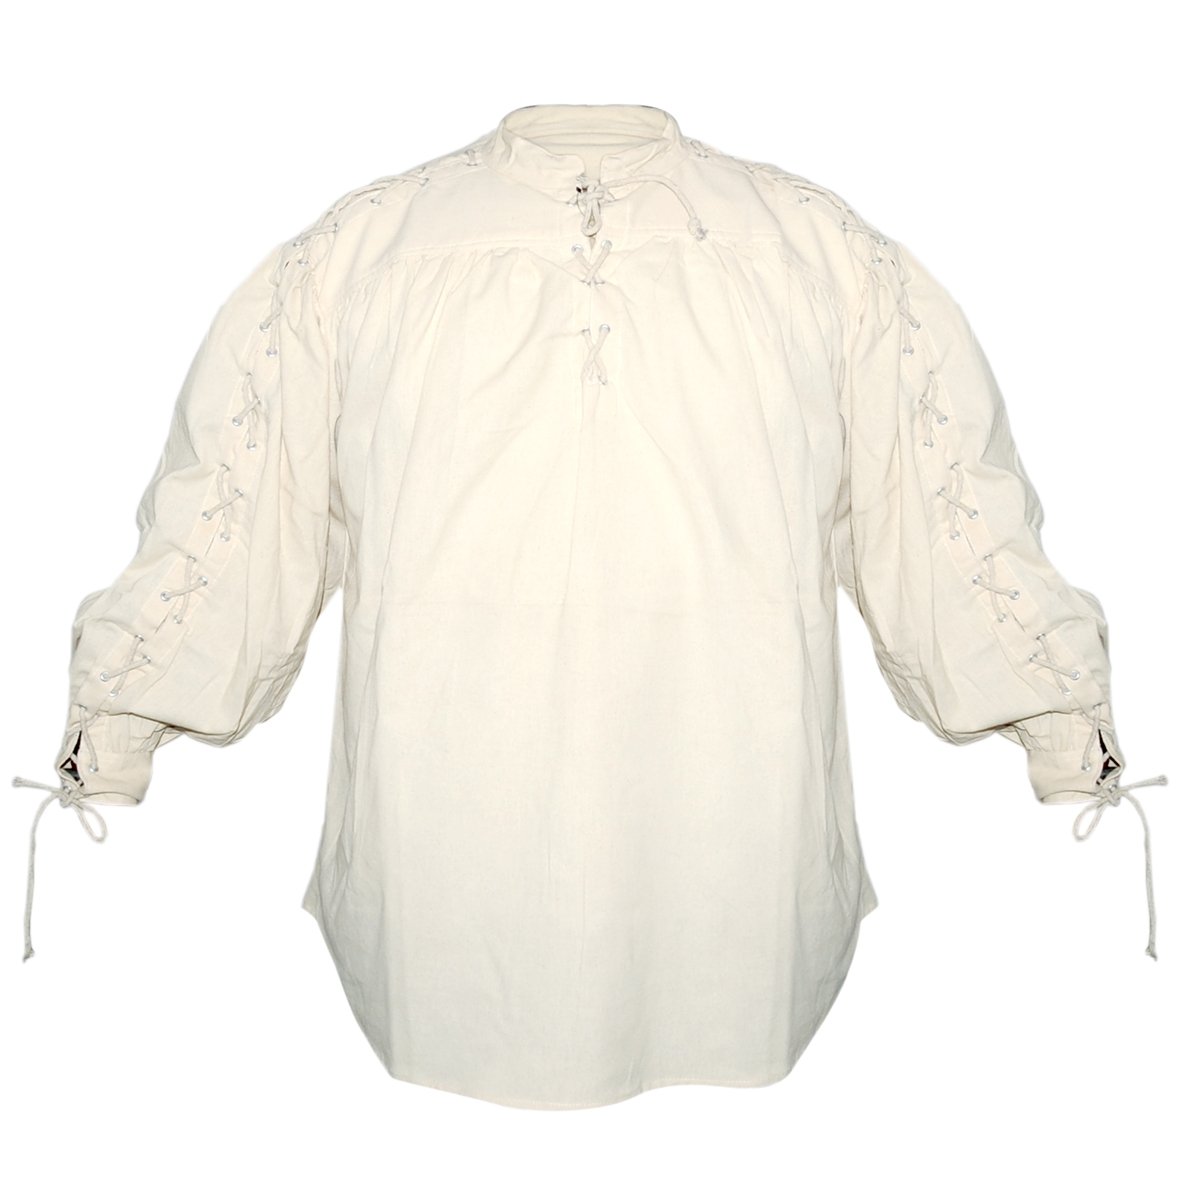 Collarless cotton shirt (laced neck & sleeves) - natural color, Size M